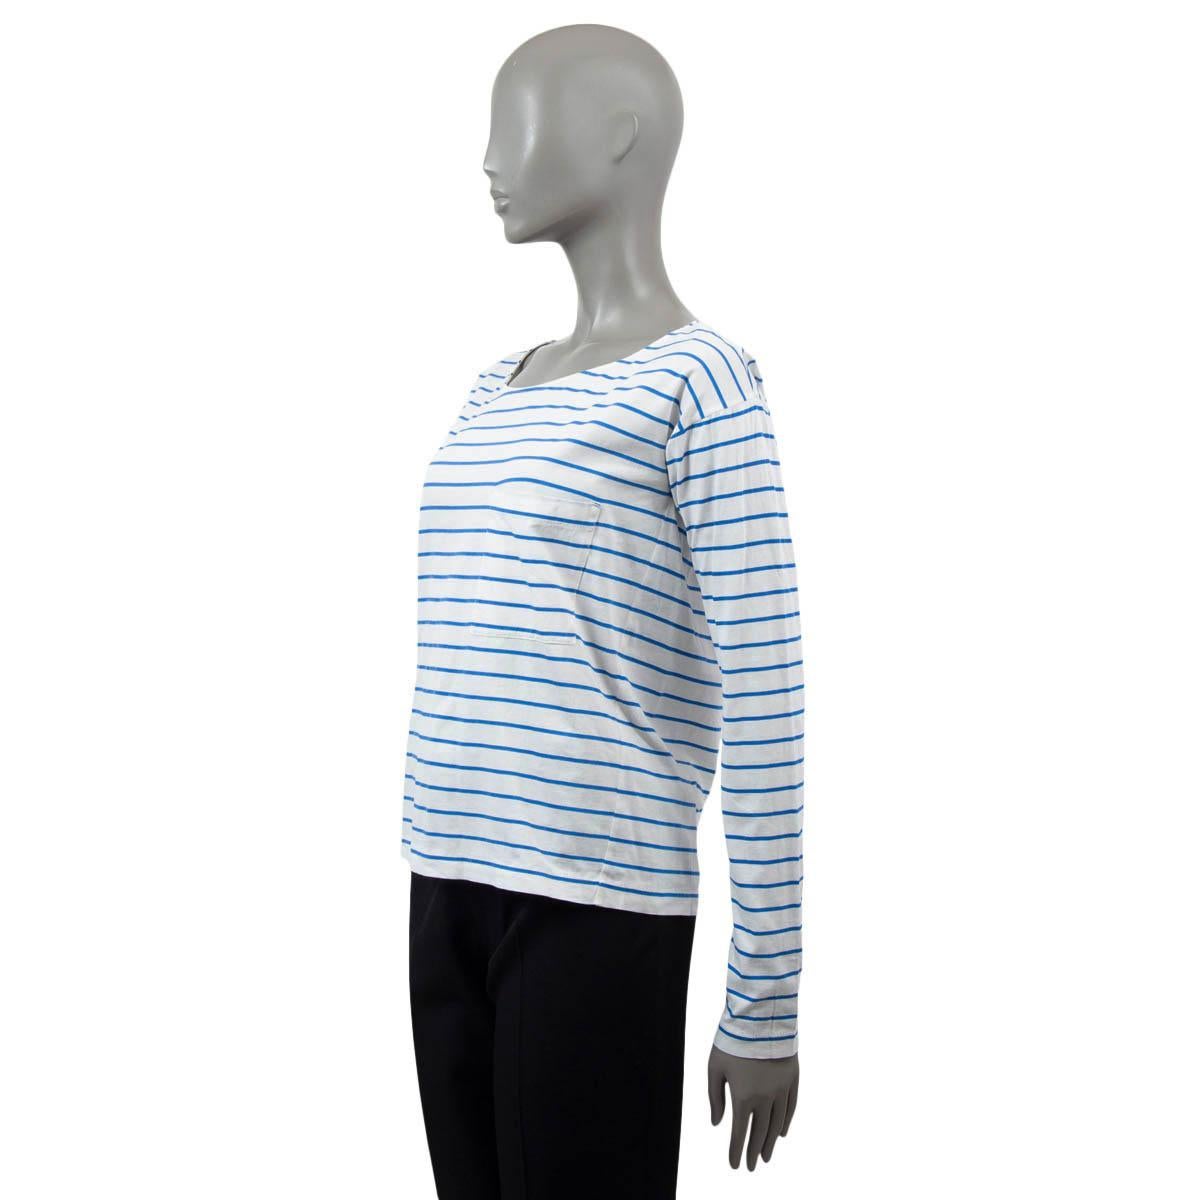 PRADA blue & white cotton STRIPED LONG SLEEVE JERSEY Shirt XS In Excellent Condition For Sale In Zürich, CH